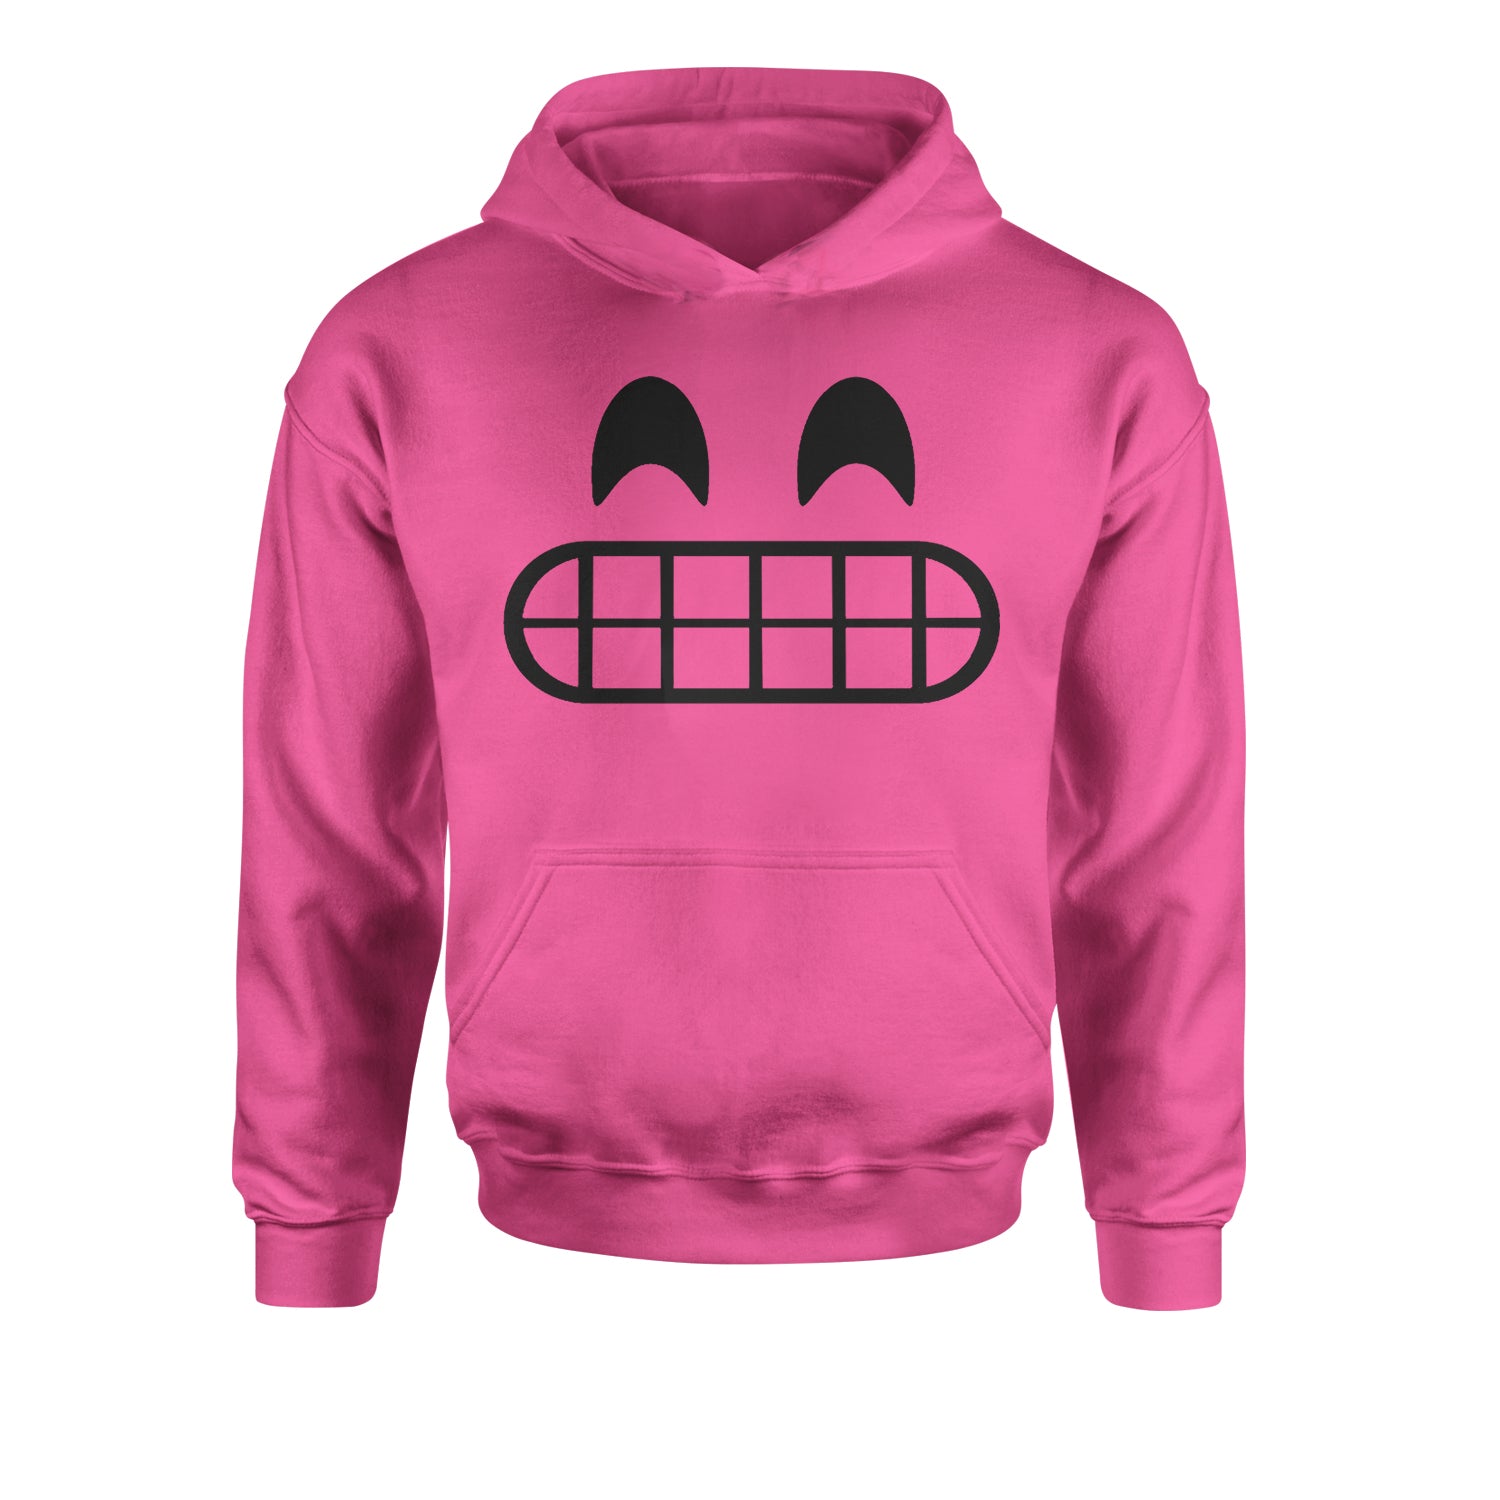 Emoticon Grinning Smile Face Youth-Sized Hoodie cosplay, costume, dress, emoji, emote, face, halloween, smiley, up, yellow, youth-sized by Expression Tees